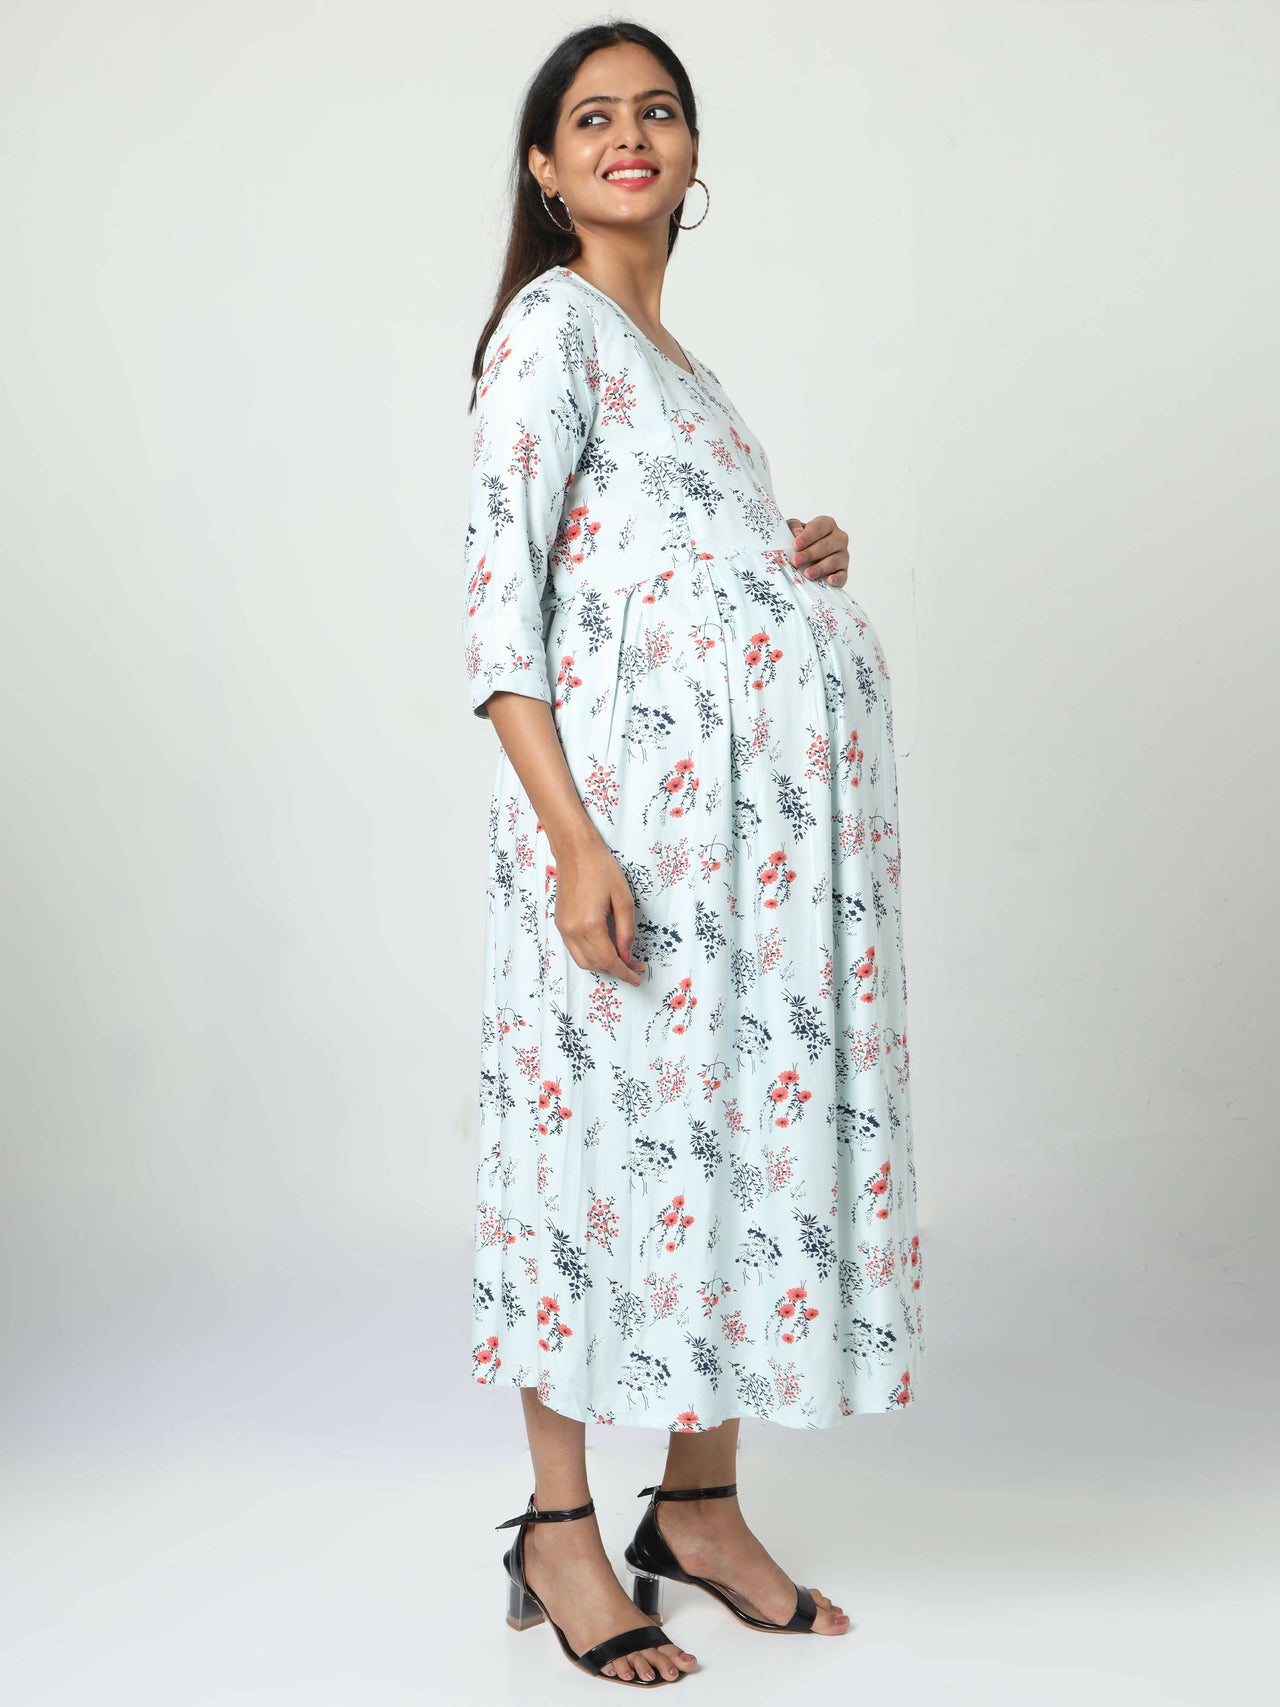 Manet Three Fourth Maternity Dress Floral Print With Concealed Zipper Nursing Access - Pista Green - Distacart